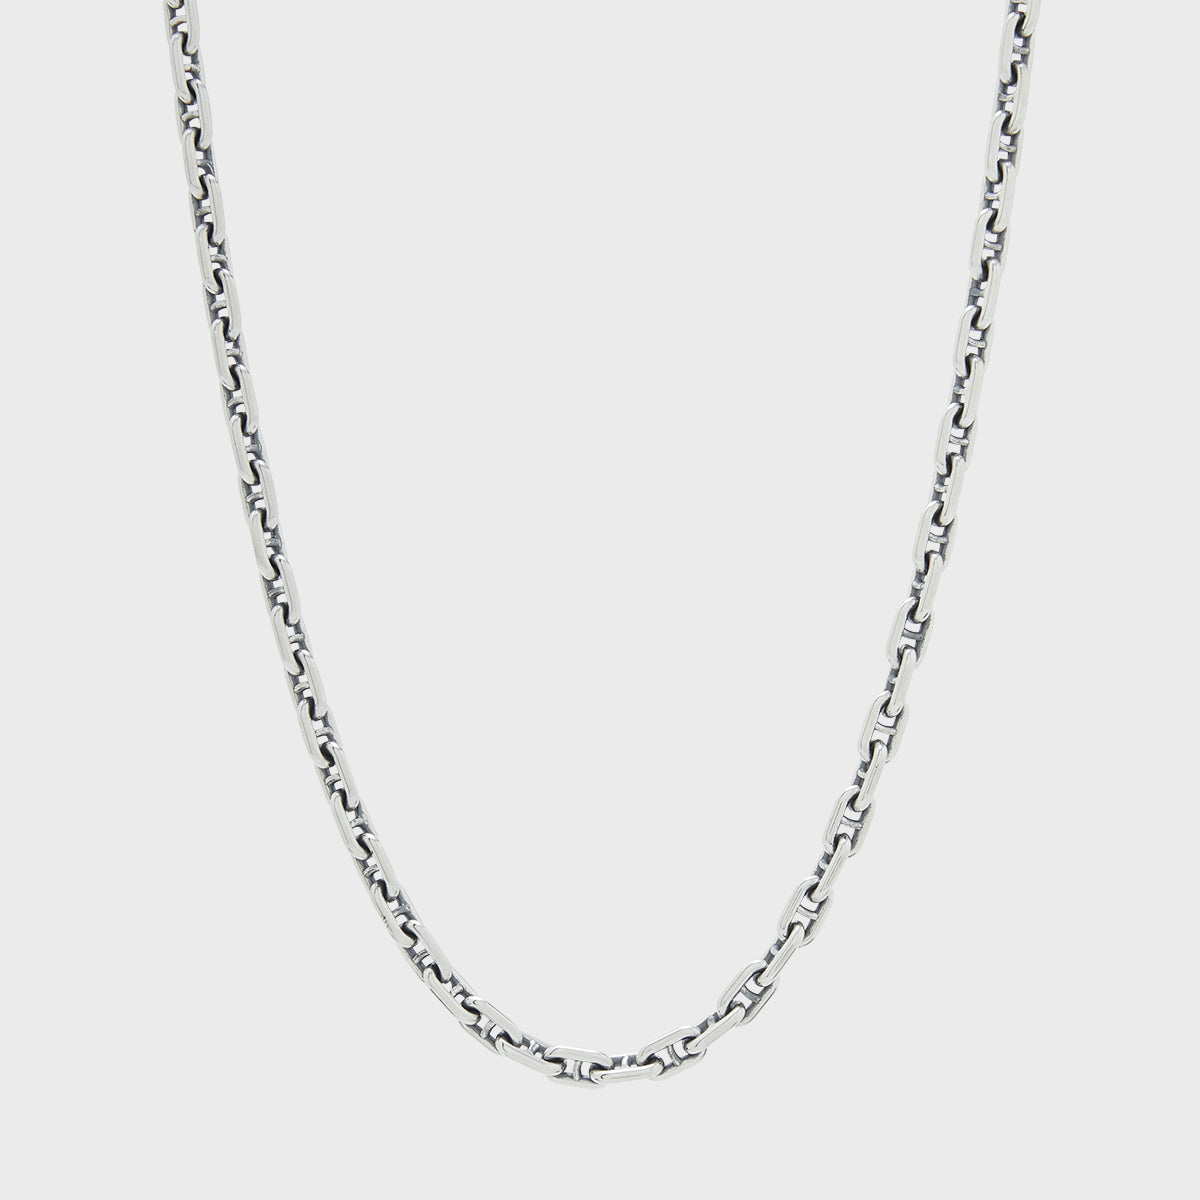 Model 22 Necklace - AAA